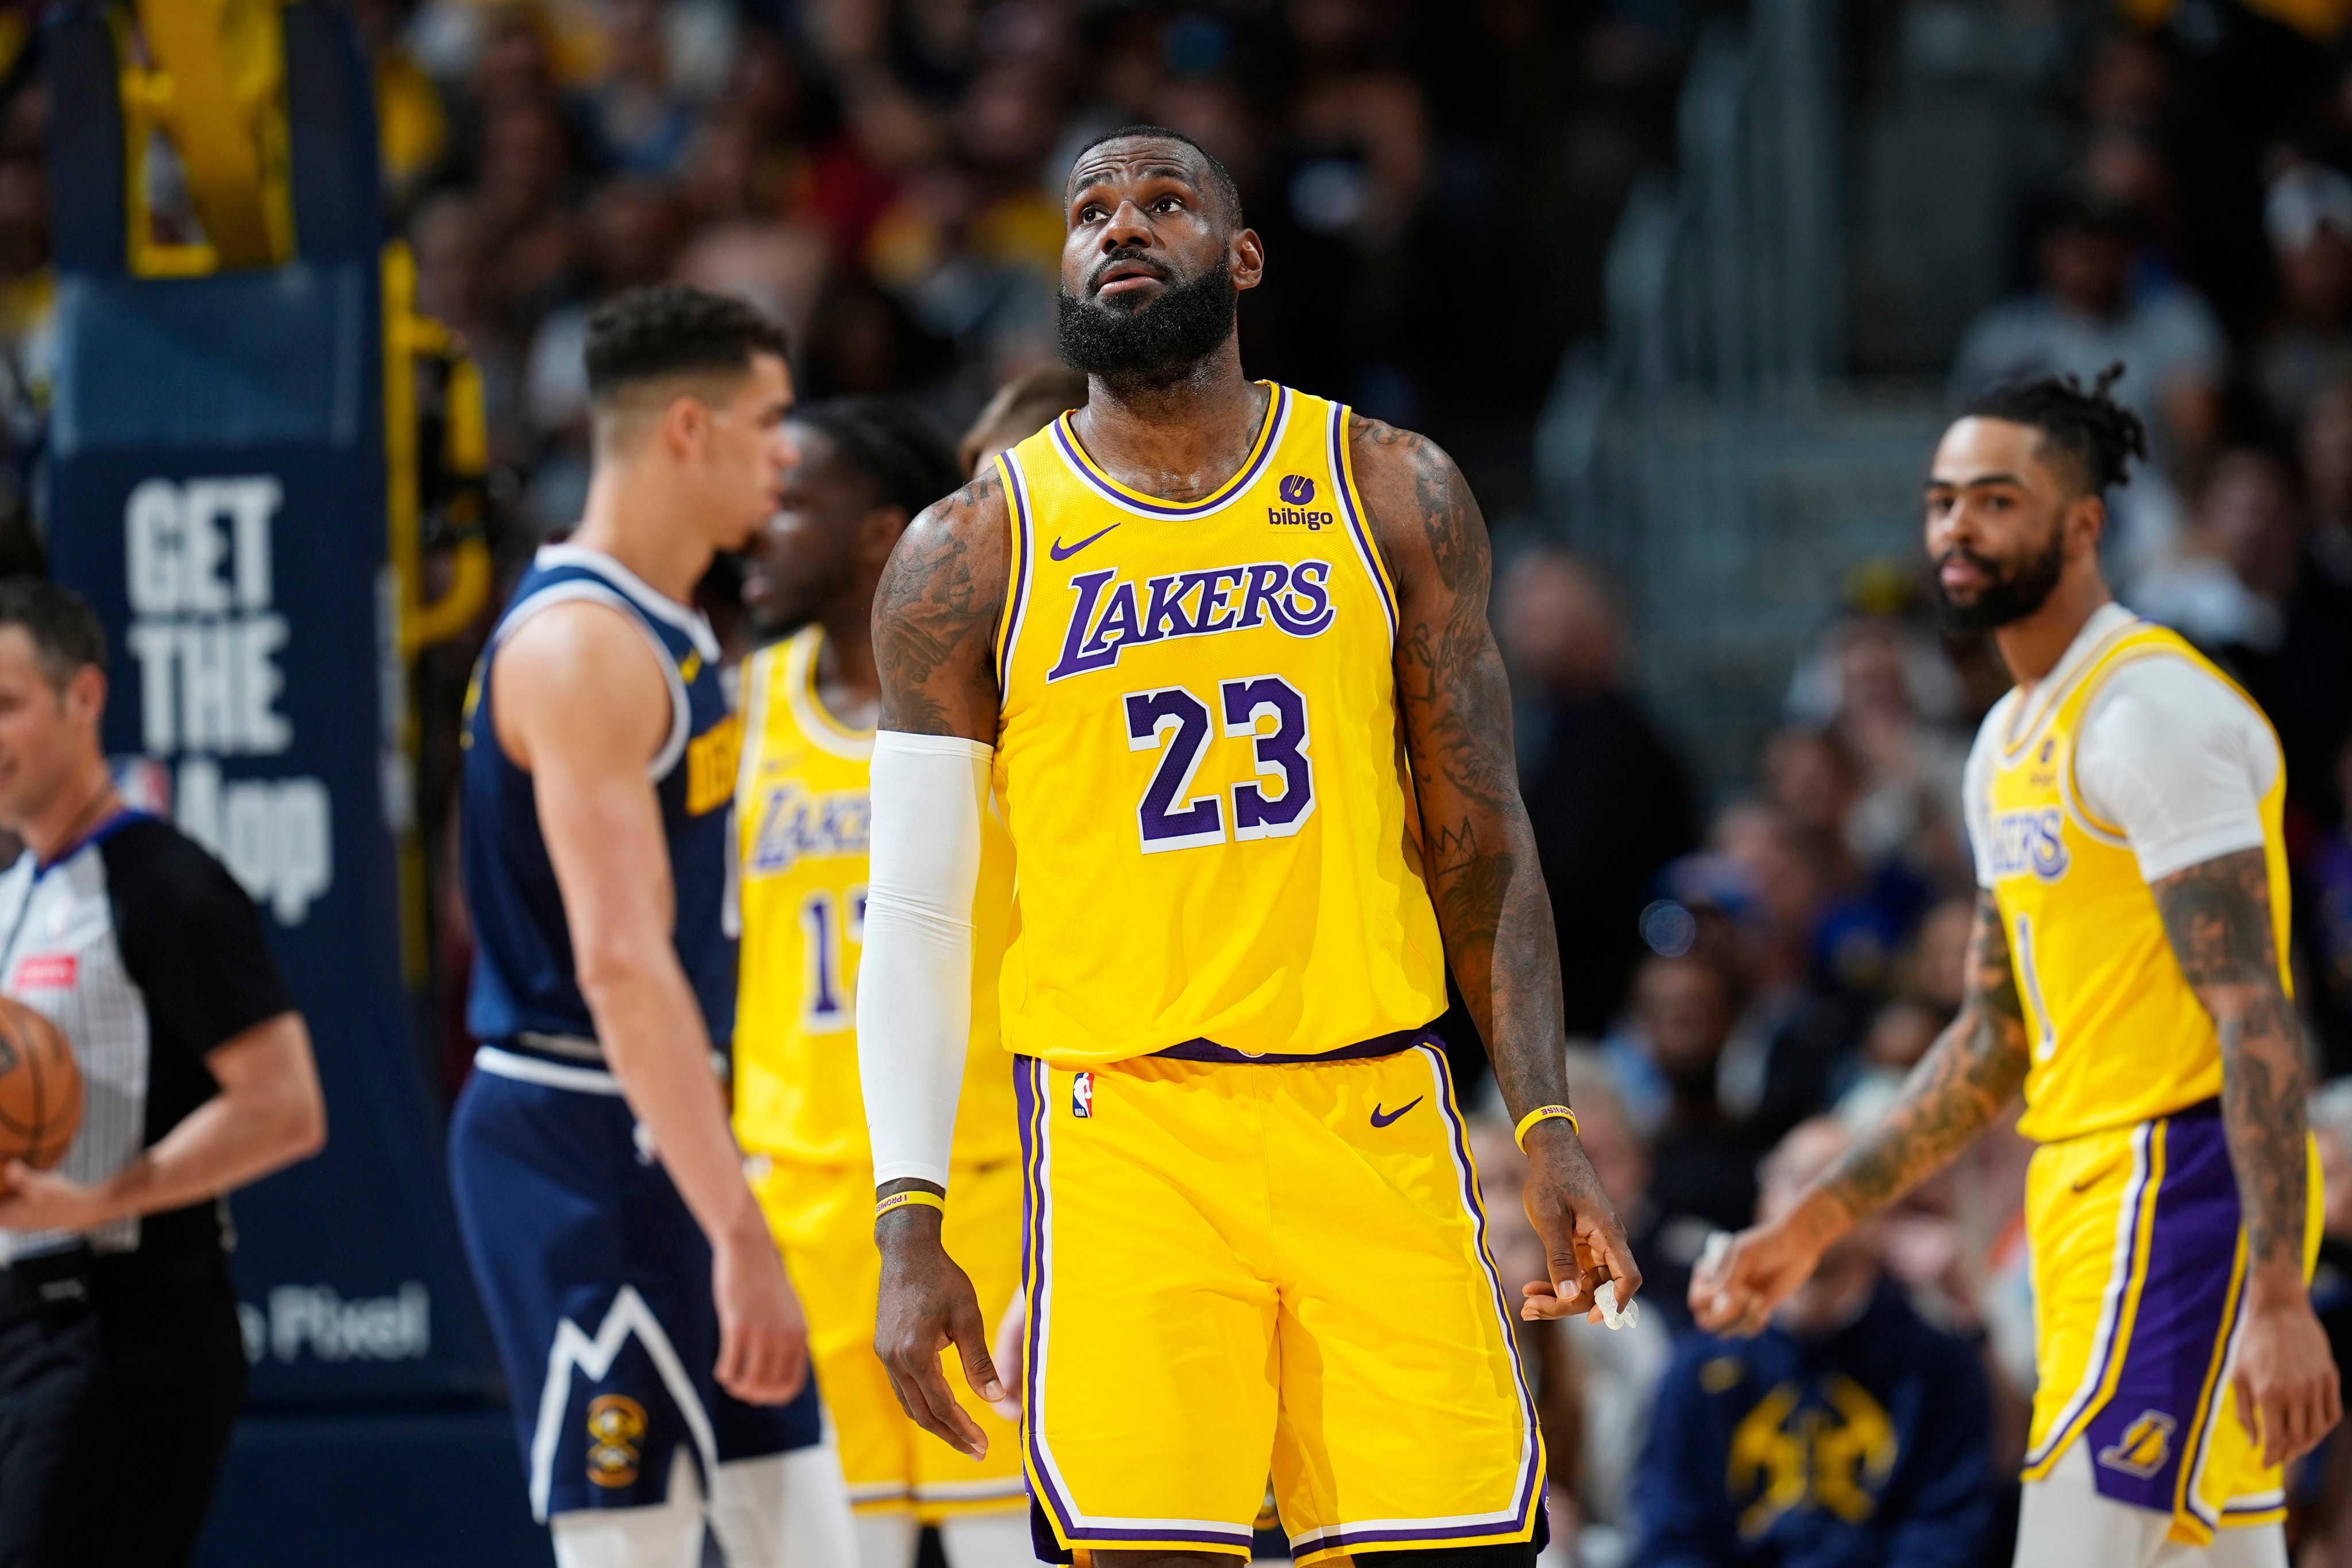 LeBron James said after the LA Lakers’ playoff defeat to the Denver Nuggets that he had not given serious thought to his next steps. Photo: AP